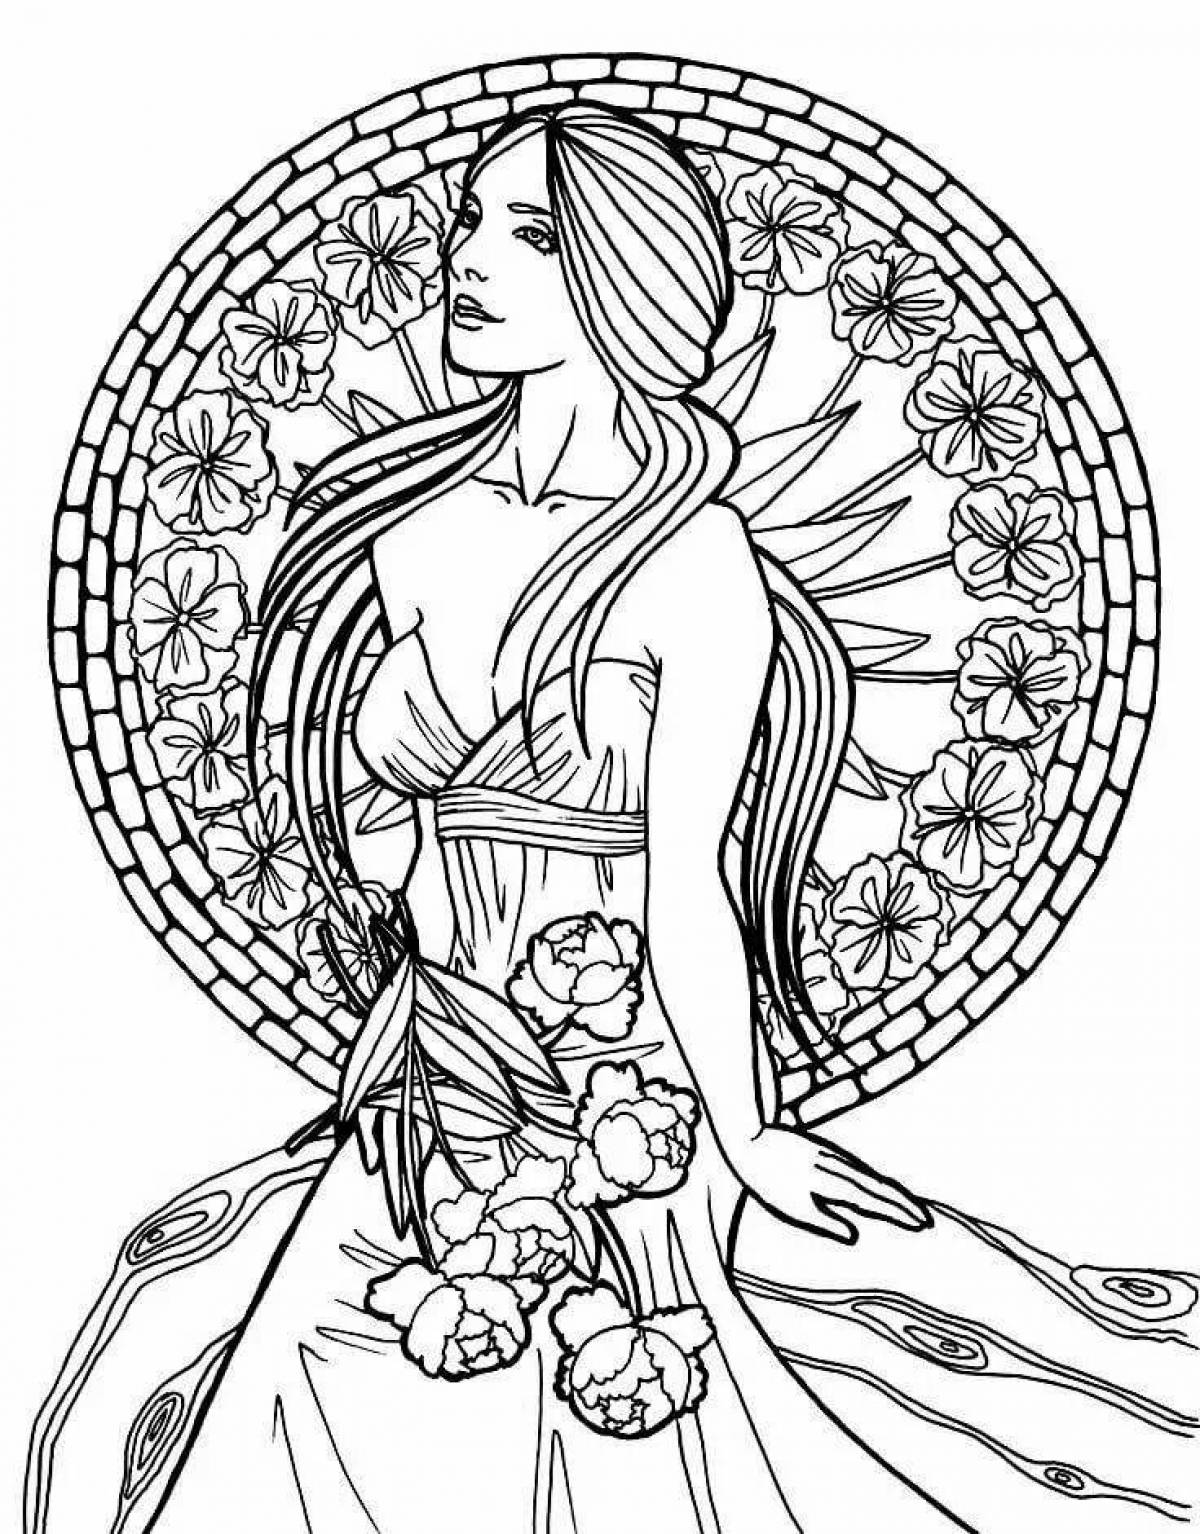 Mystical coloring book for adult girls